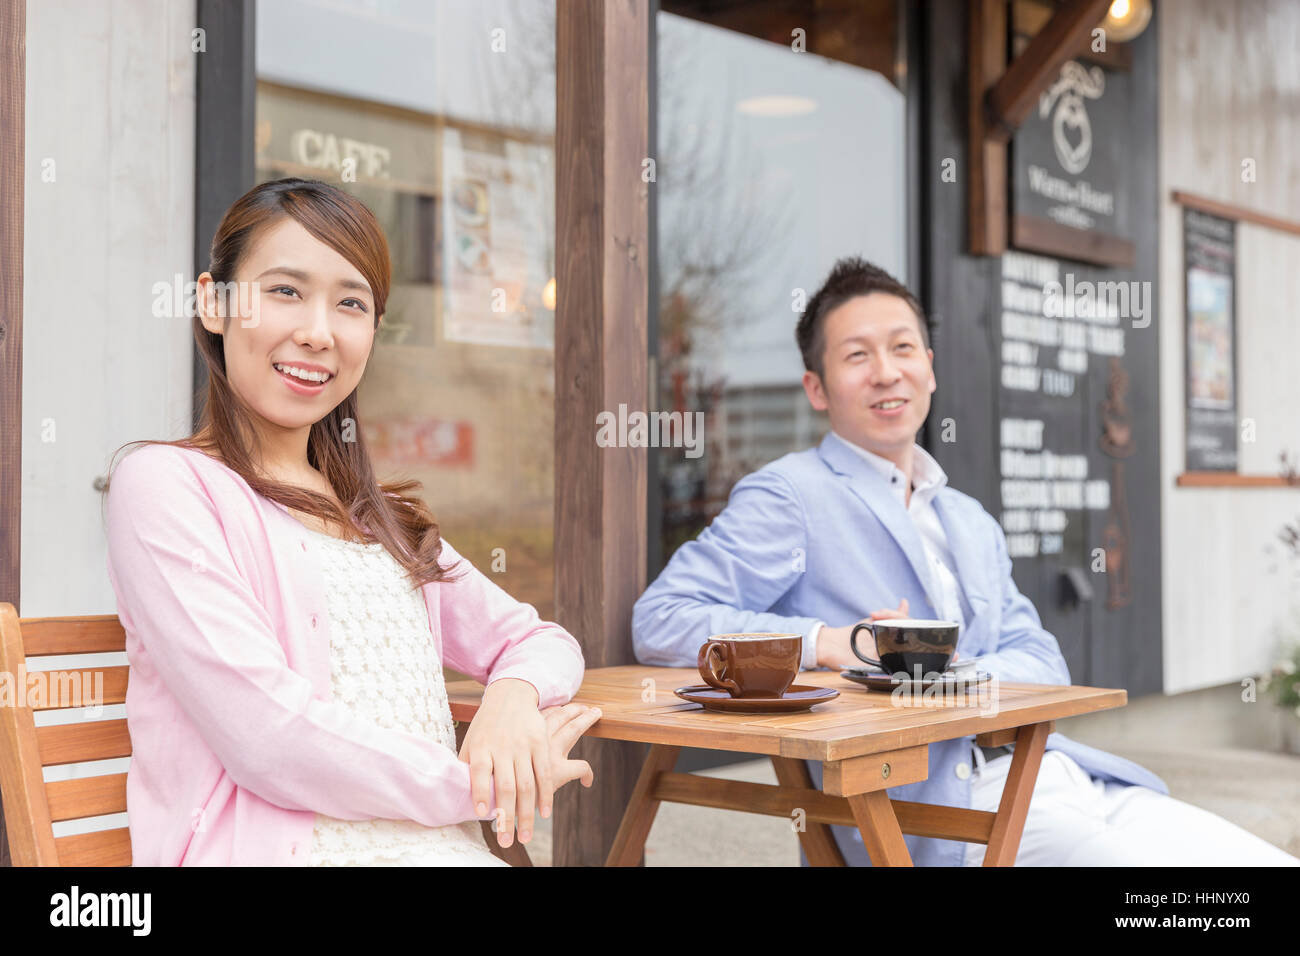 Couple Sitting in Chair with Smile Stock Photo